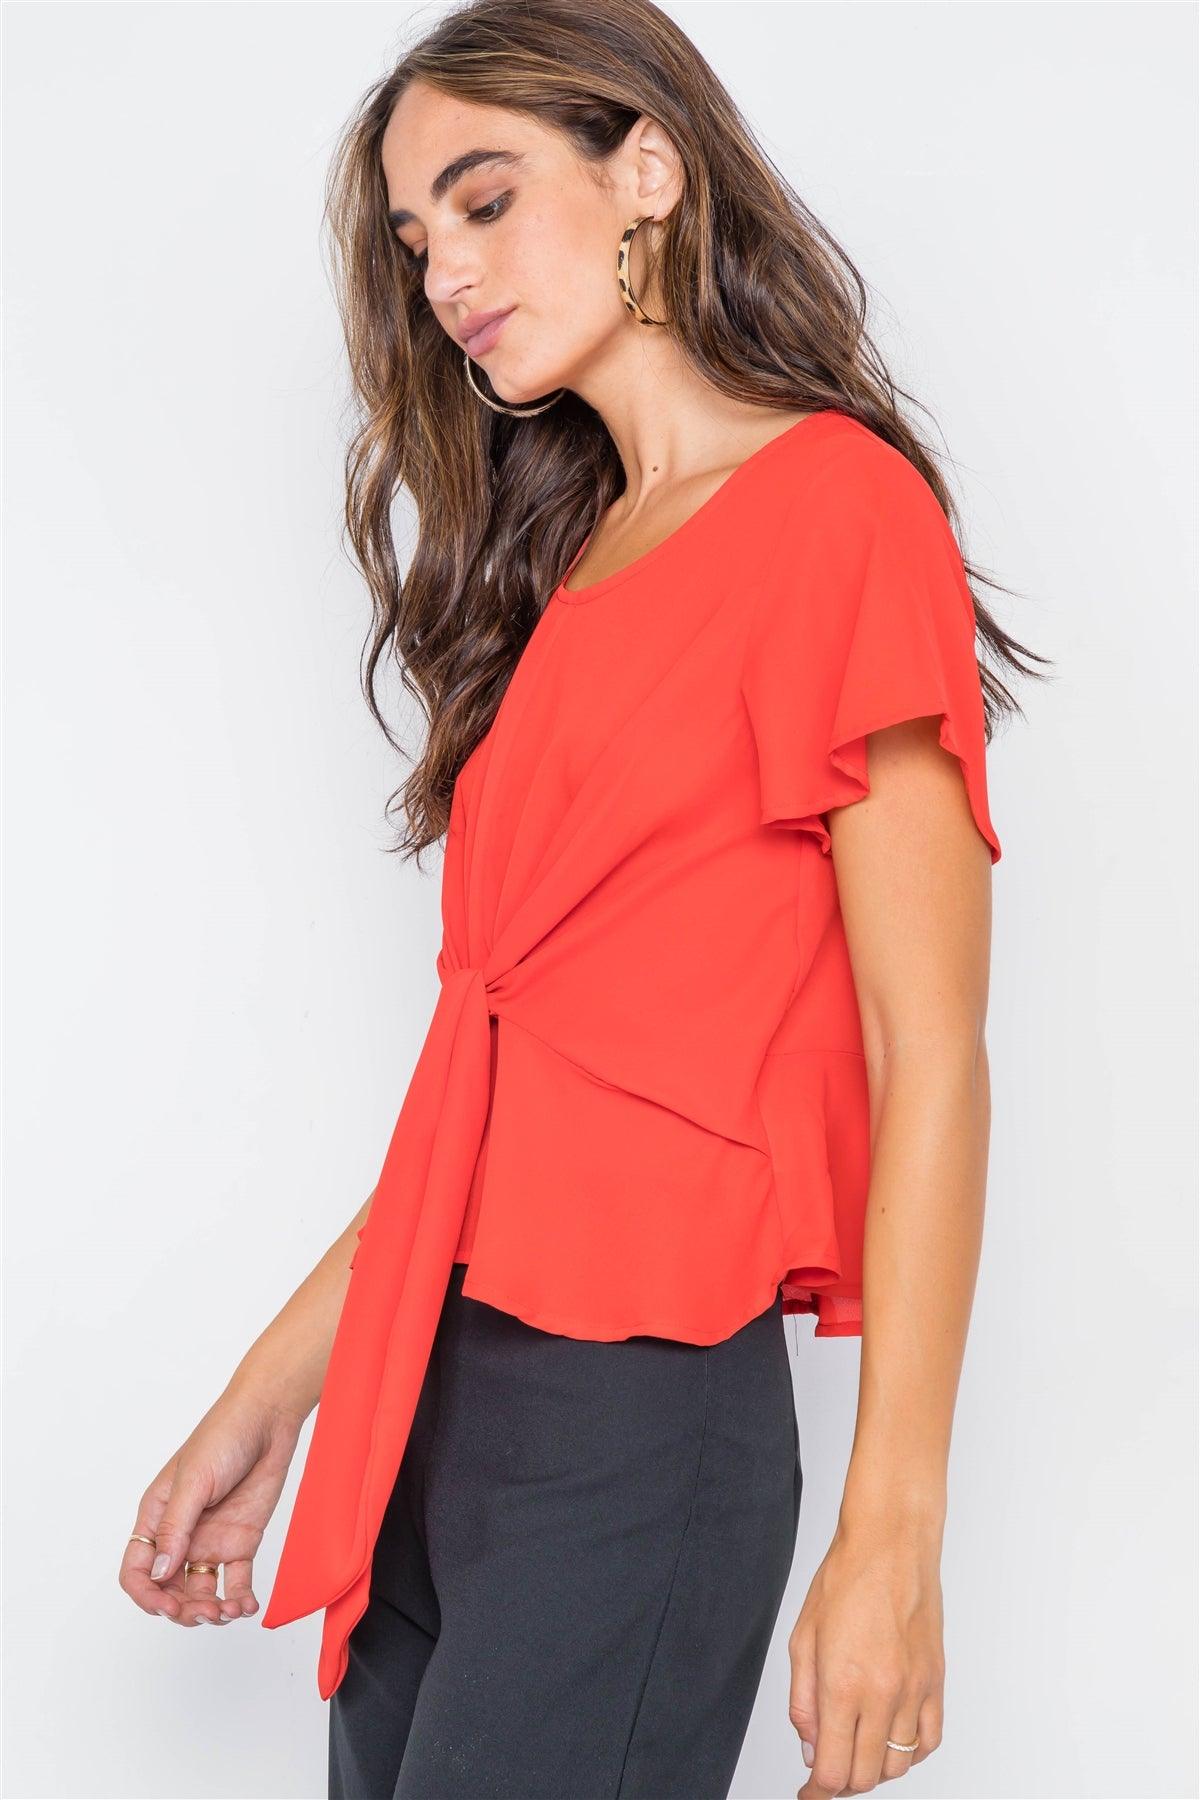 Tomato Tie-Front Butterfly Sleeve Chiffon Blouse